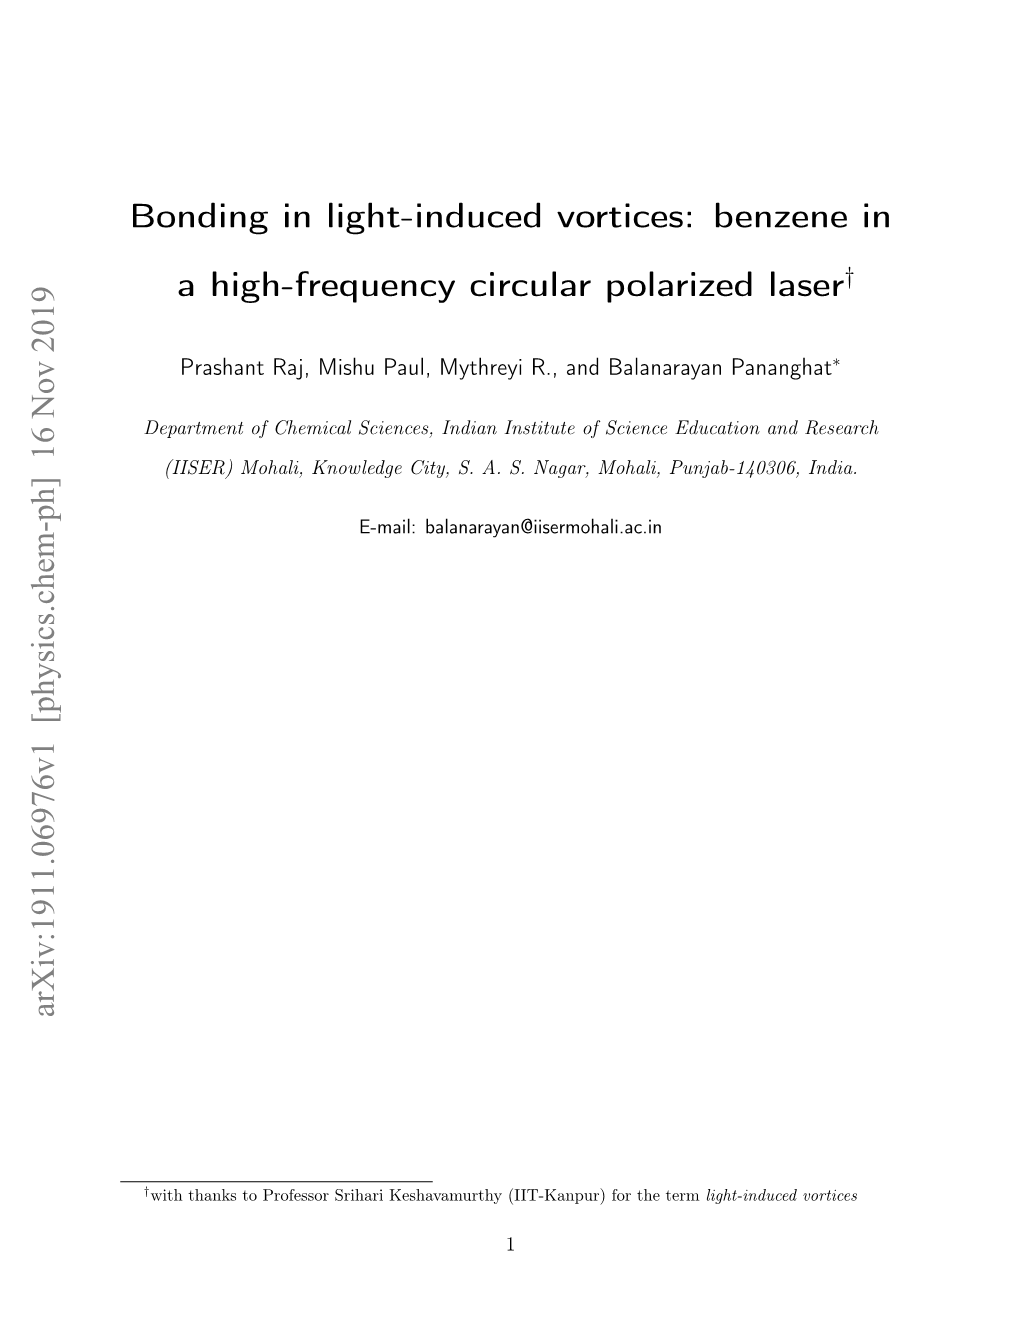 Bonding in Light-Induced Vortices: Benzene in a High-Frequency Circular Polarized Laser Arxiv:1911.06976V1 [Physics.Chem-Ph] 1